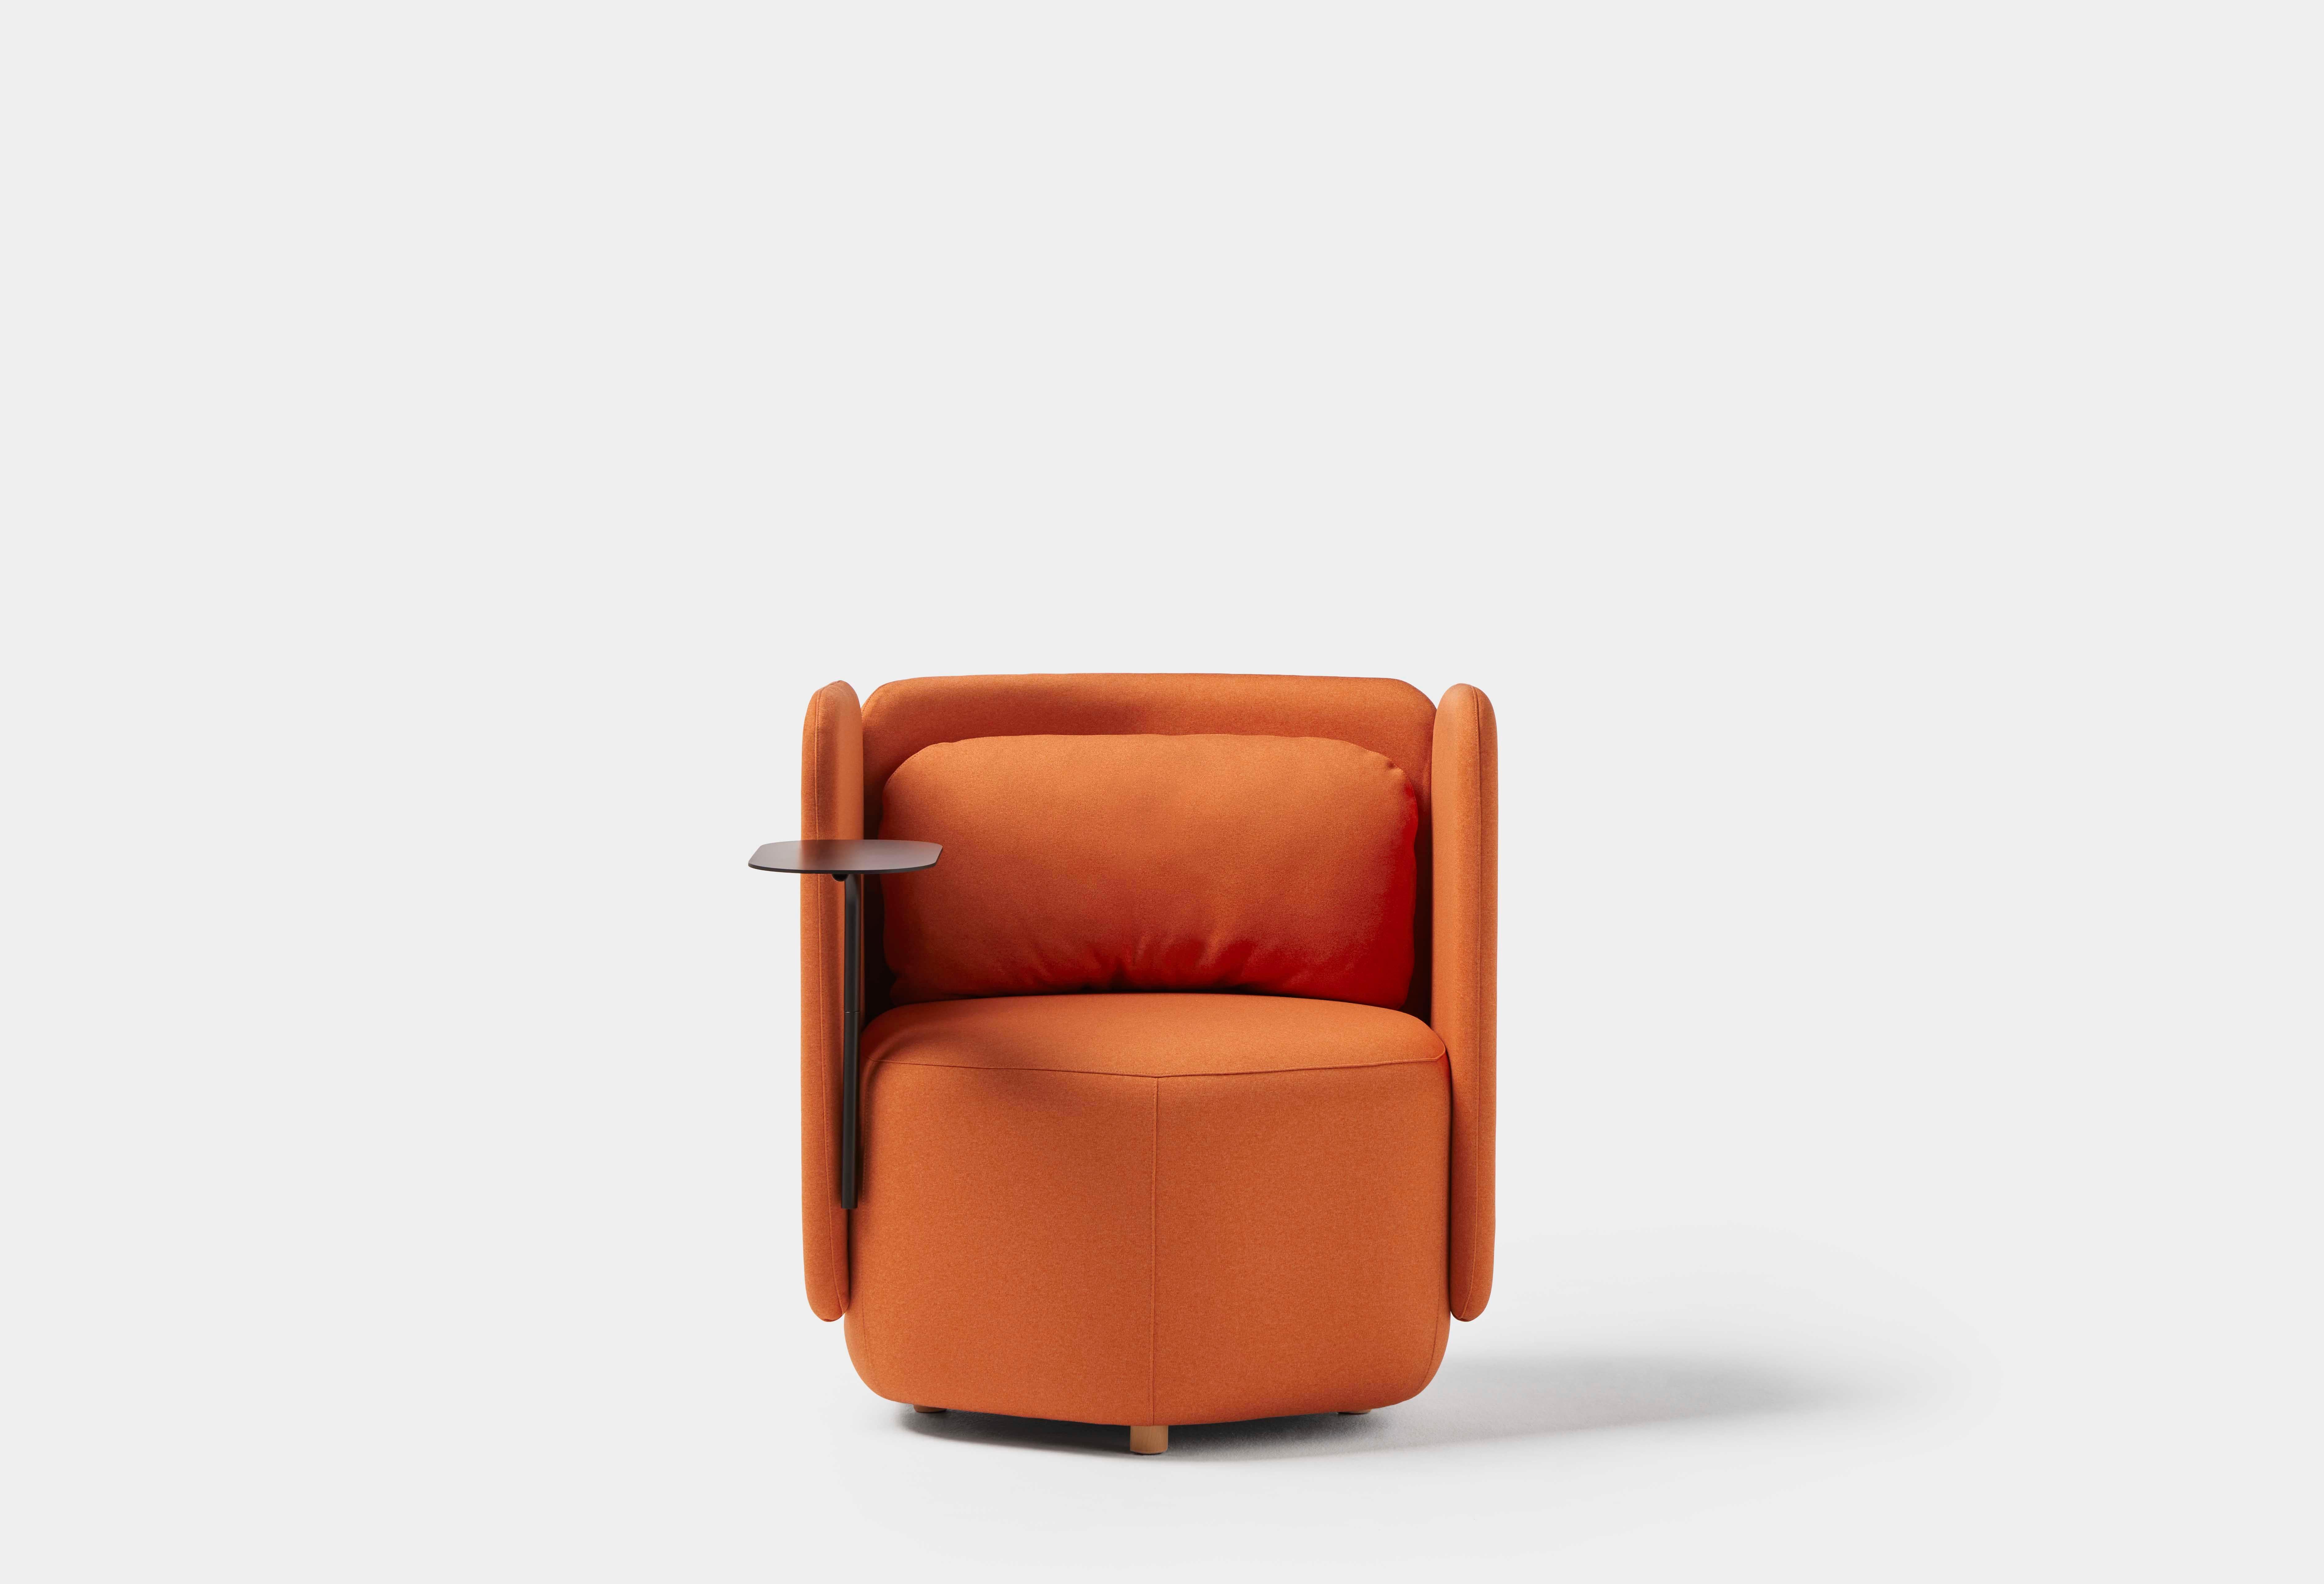 HEX Armchair low panels with side table by Pepe Albargues.
Dimensions: W 76 x D 77 x H 80 x Seat 44
Materials: Pine wood and tablex seat structure. Backrest with metal frame, plywood and tablex board. Foam CMHR (high resilience and flame retardant)